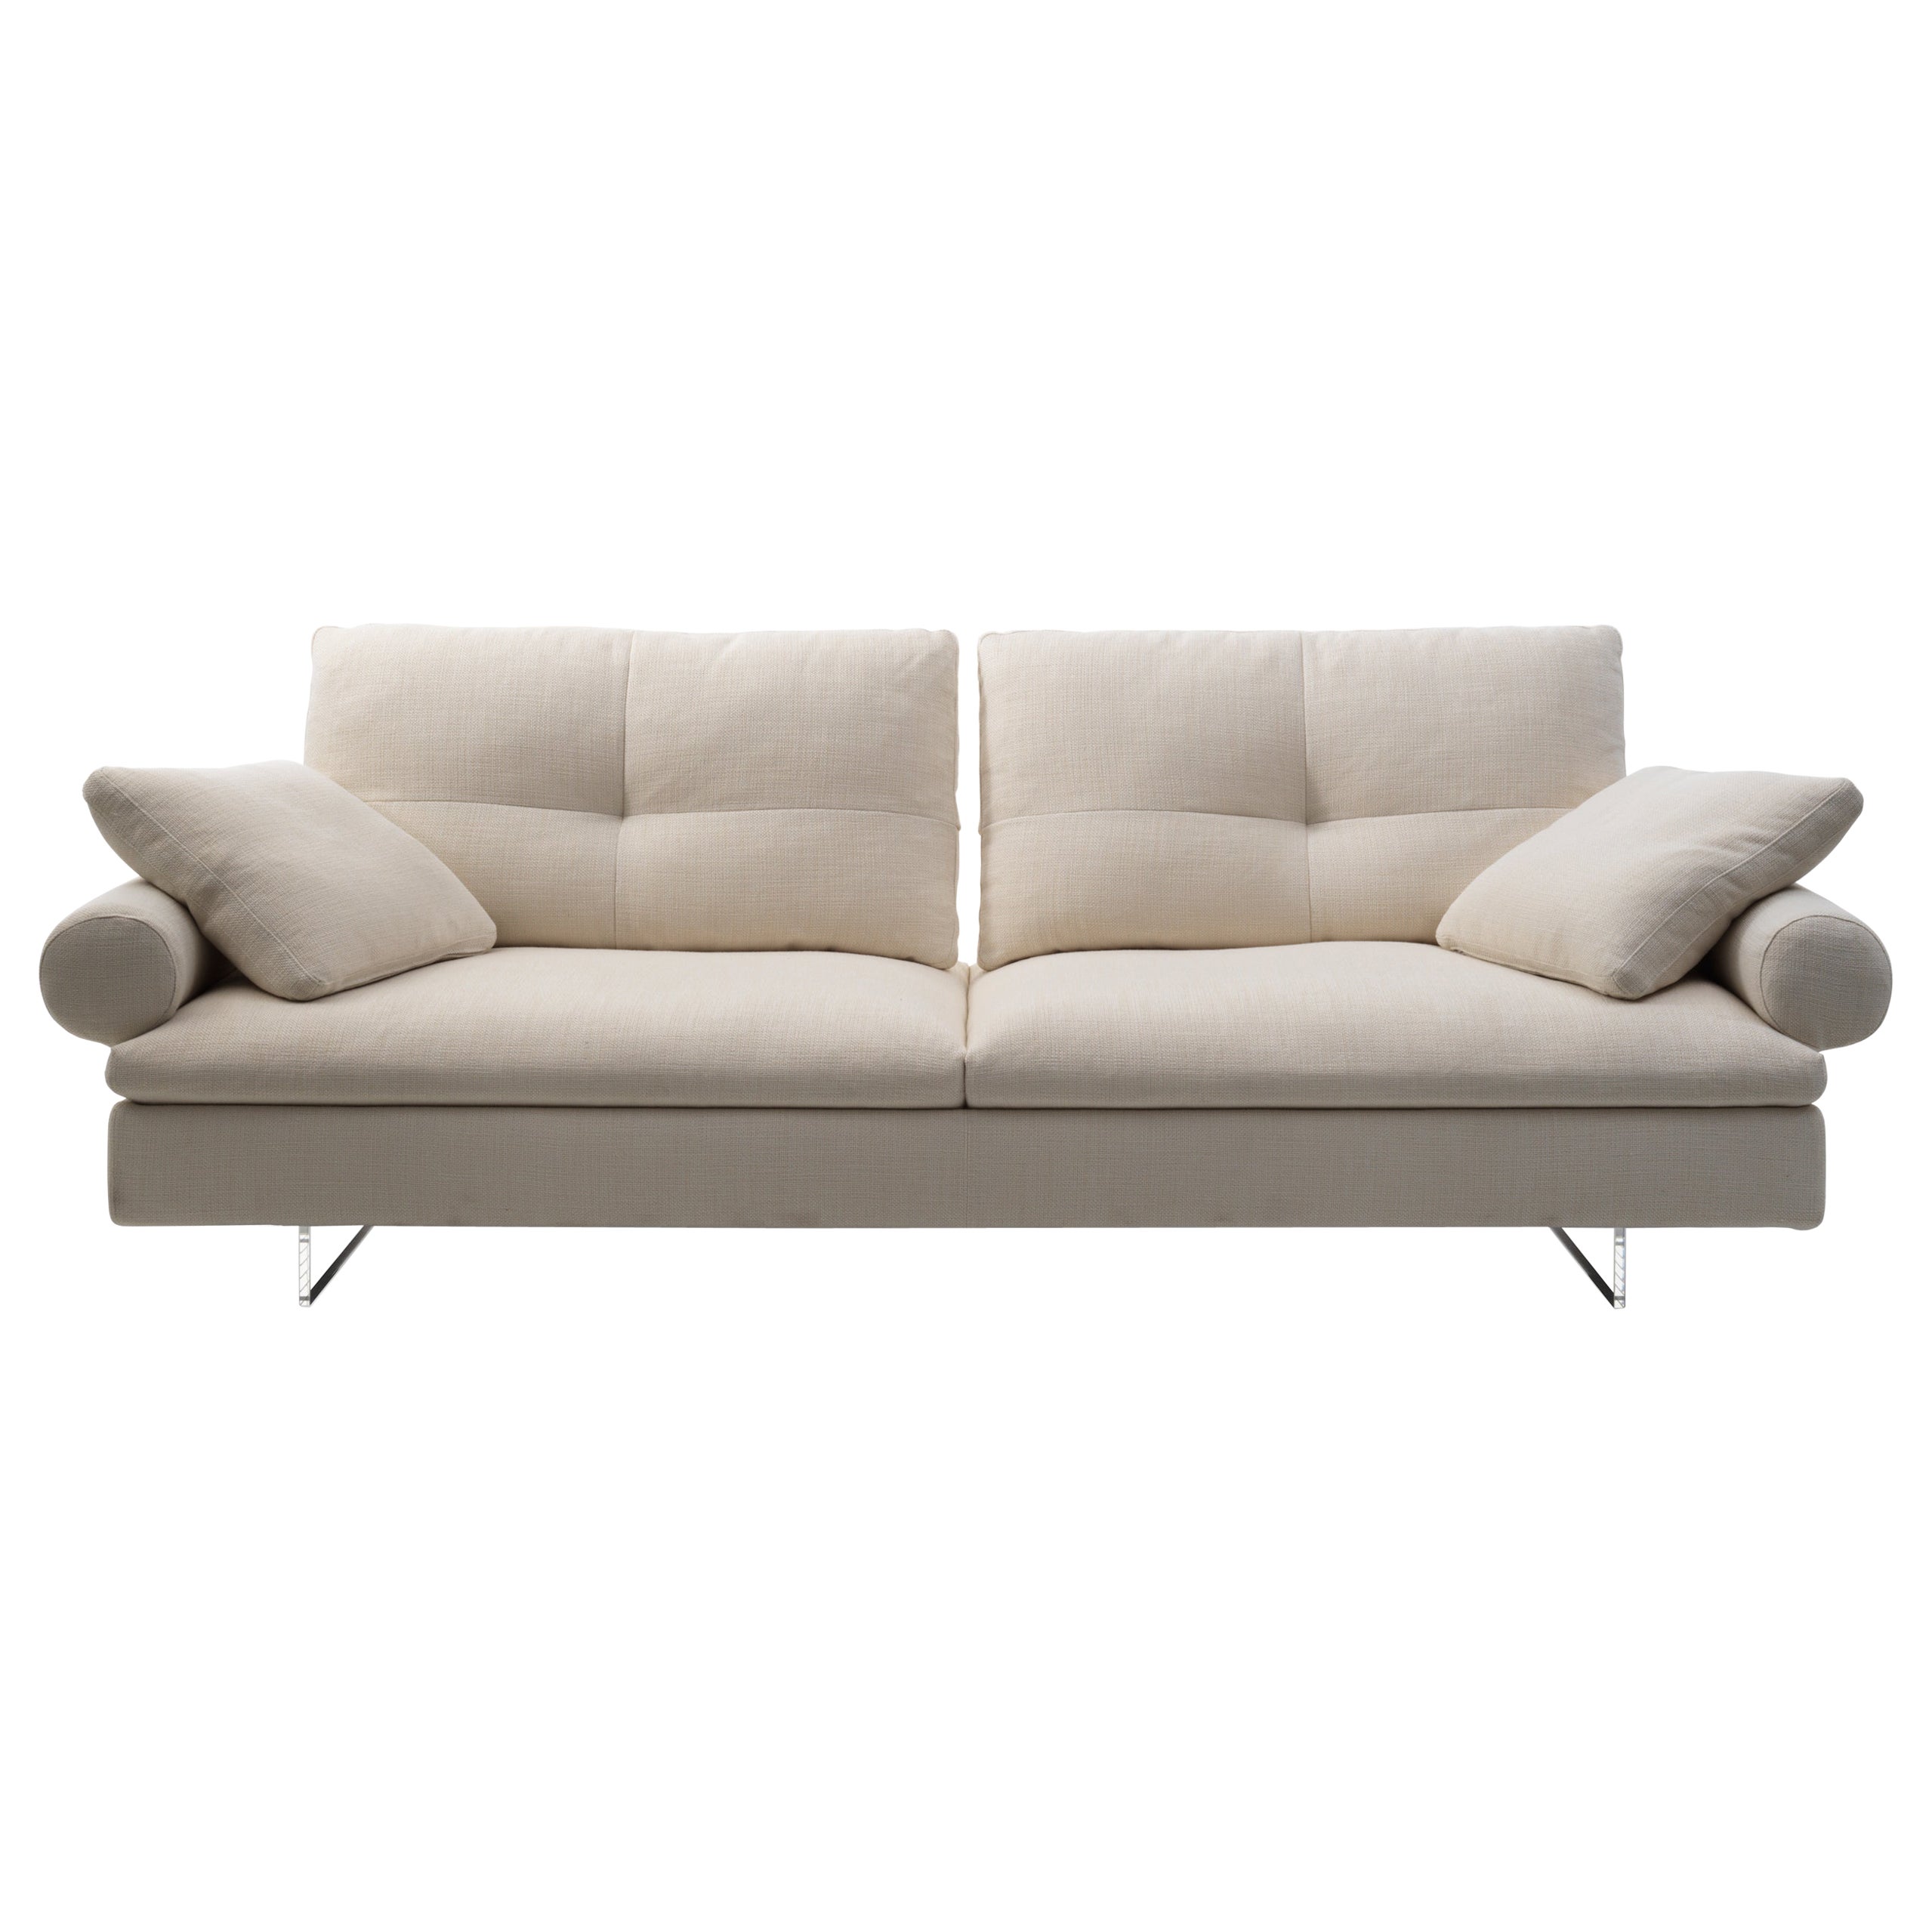 Limes New 80 Large Sofa in Beige Upholstery with Roll Armrest by Sergio Bicego en vente